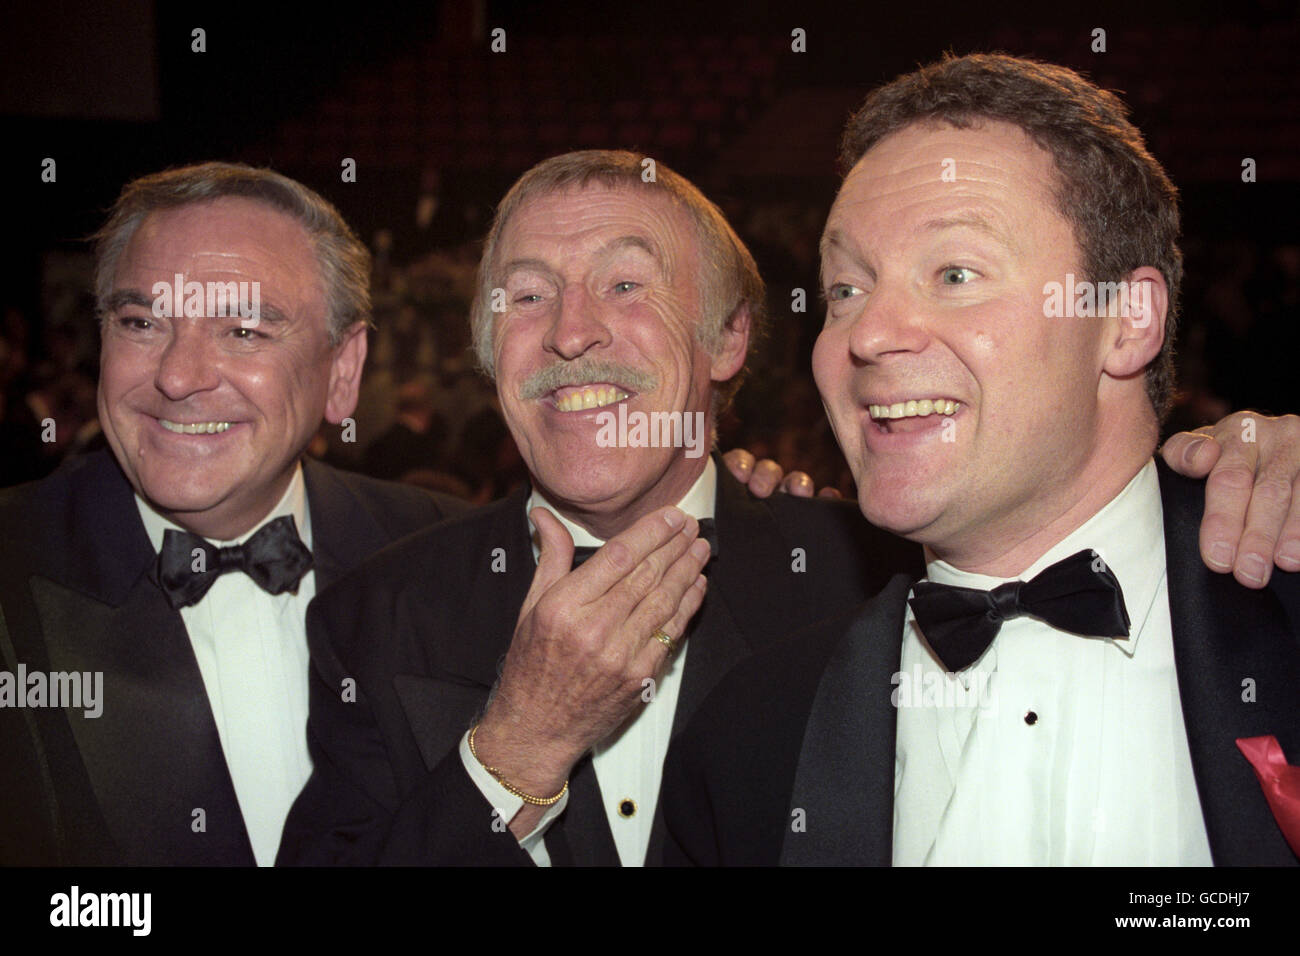 (L/R) COMEDIANS BOB MONKHOUSE, BRUCE FORSYTH & RORY BREMNER CELEBRATE AFTER ALL SCOOPING ACCOLADES AT THE BRITISH COMEDY AWARDS IN LONDON. MONKHOUSE & FORSYTH BOTH RECEIVED LIFETIME ACHIEVEMENT AWARDS WHILST BREMNER WON BEST COMEDY SHOW. Stock Photo